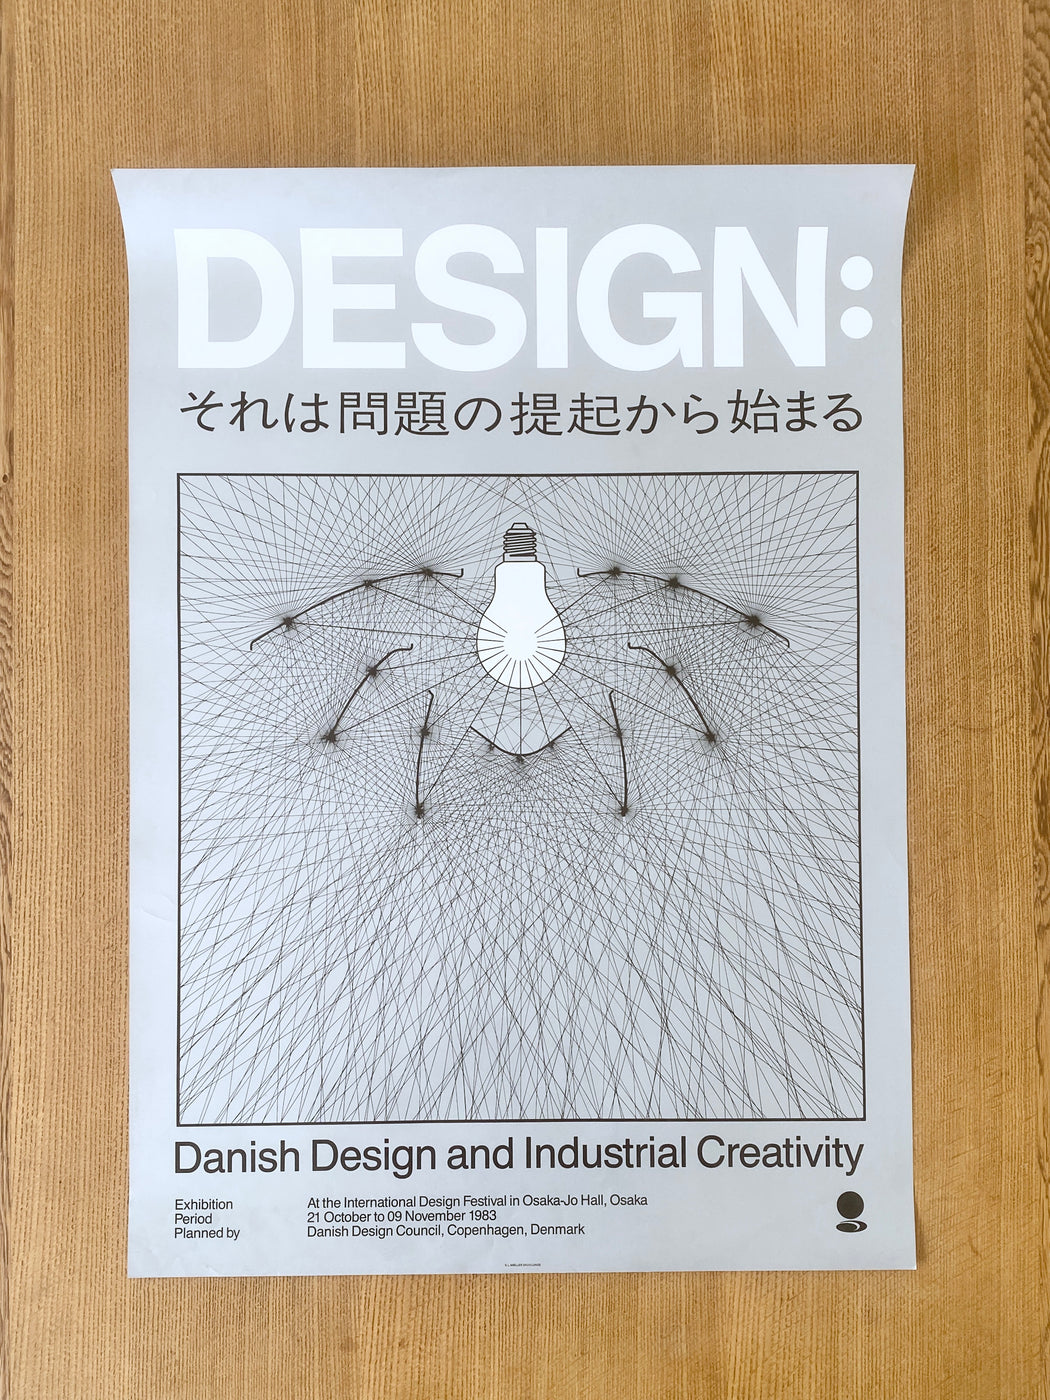 1983 Design And Industrial Creativity Exhibition Osaka Poster